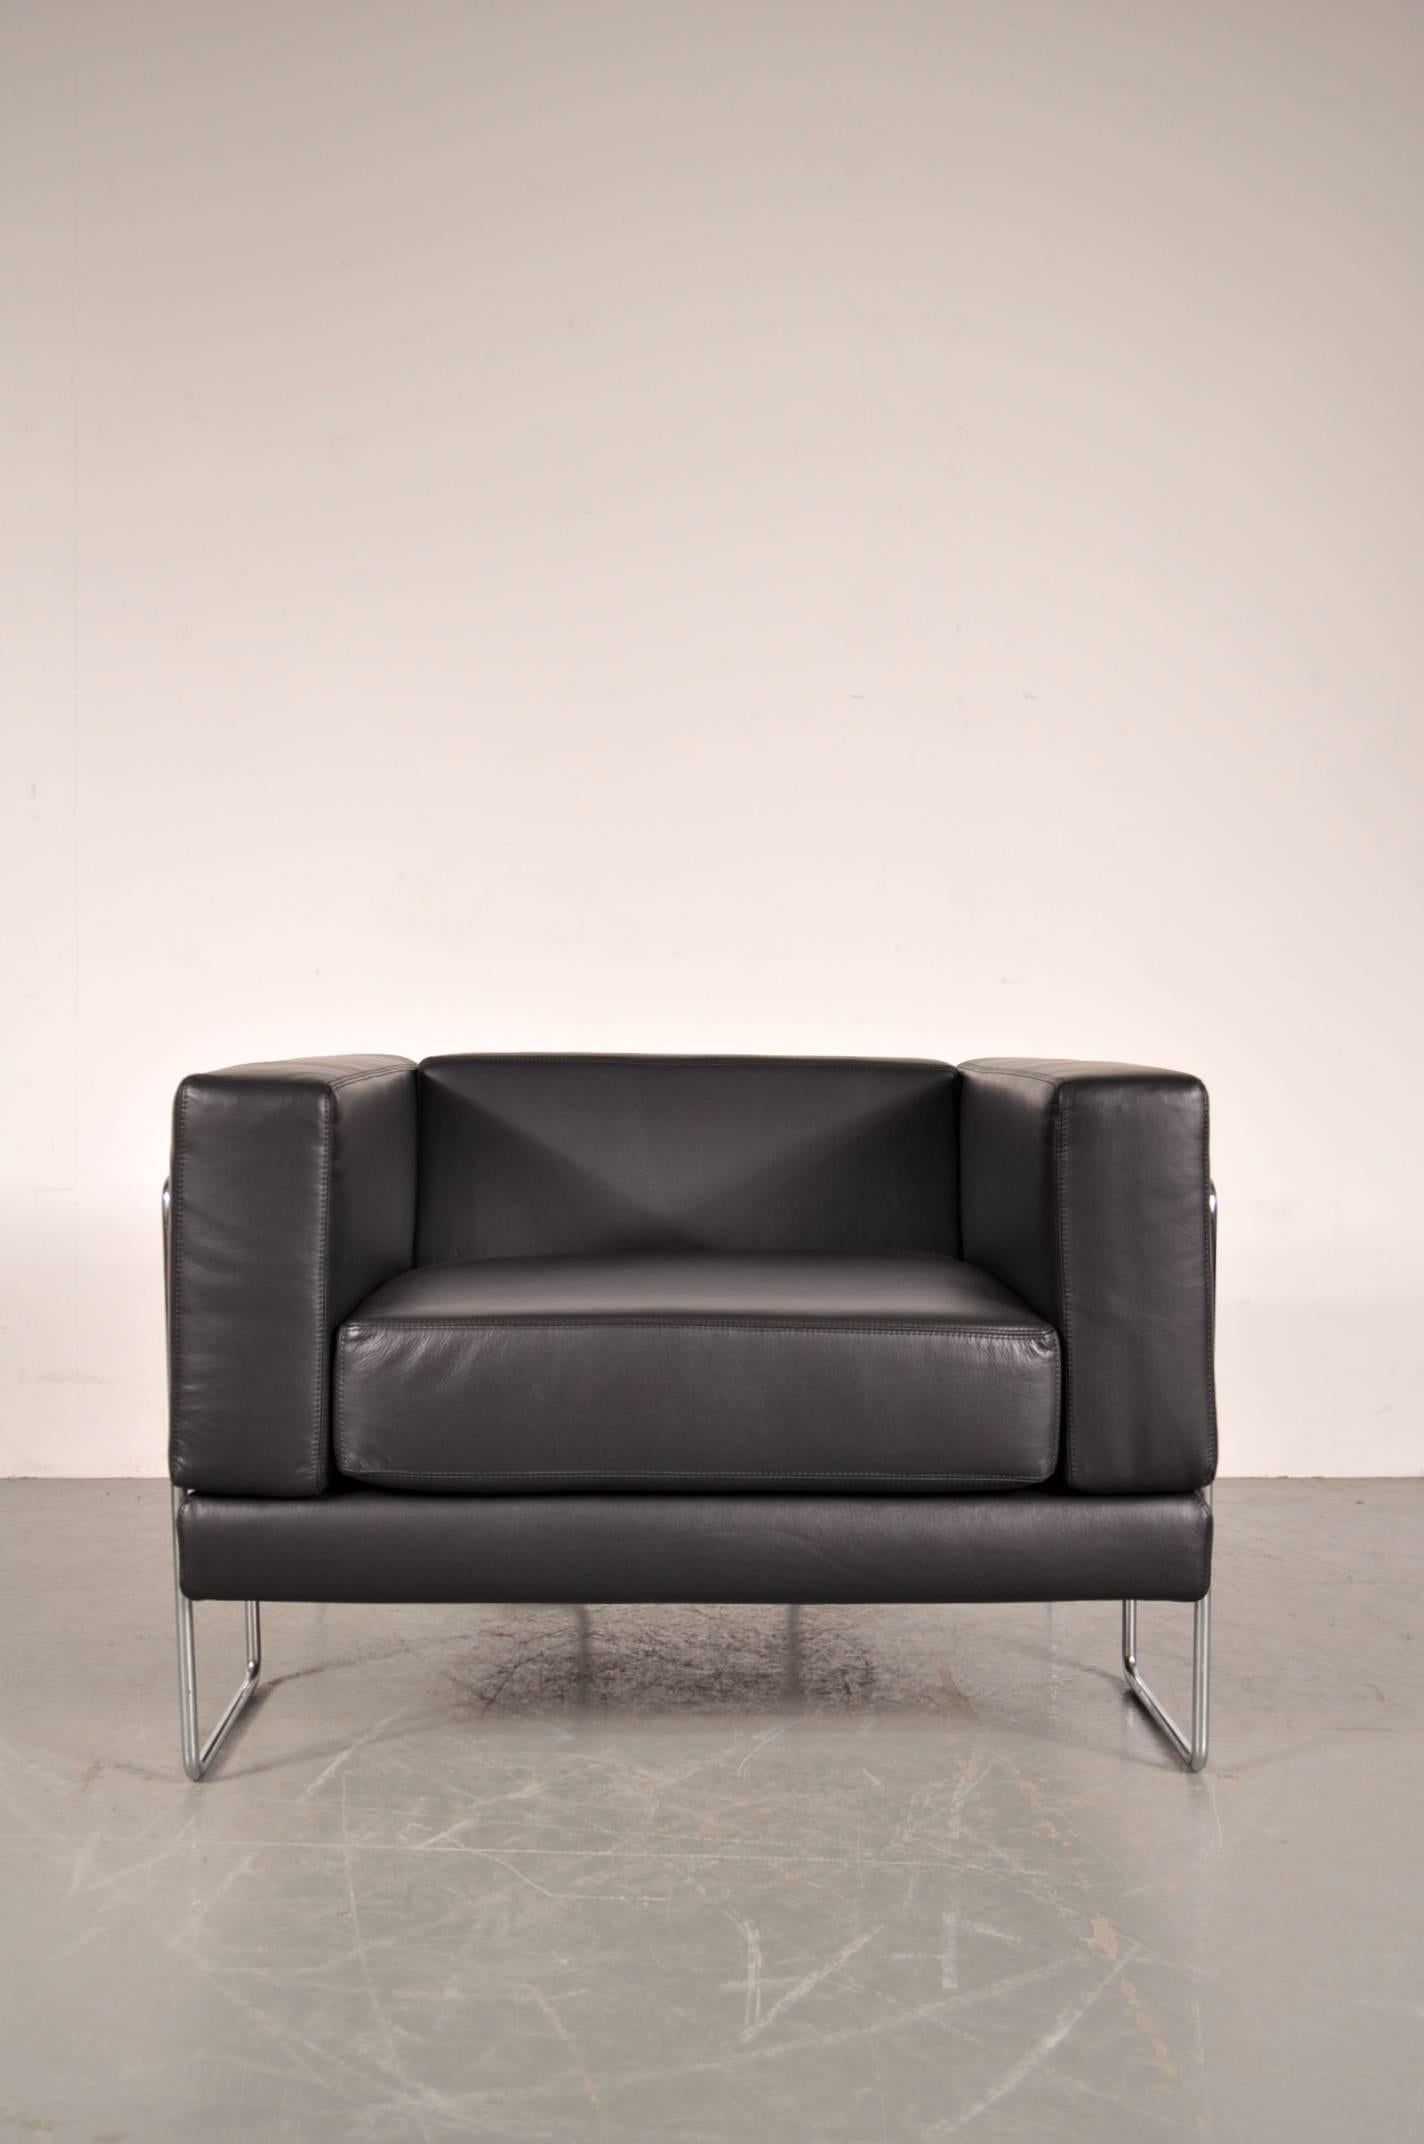 Mid-Century Modern Lounge Chair by Kwok Hoï Chan for Steiner, France, 1969 For Sale